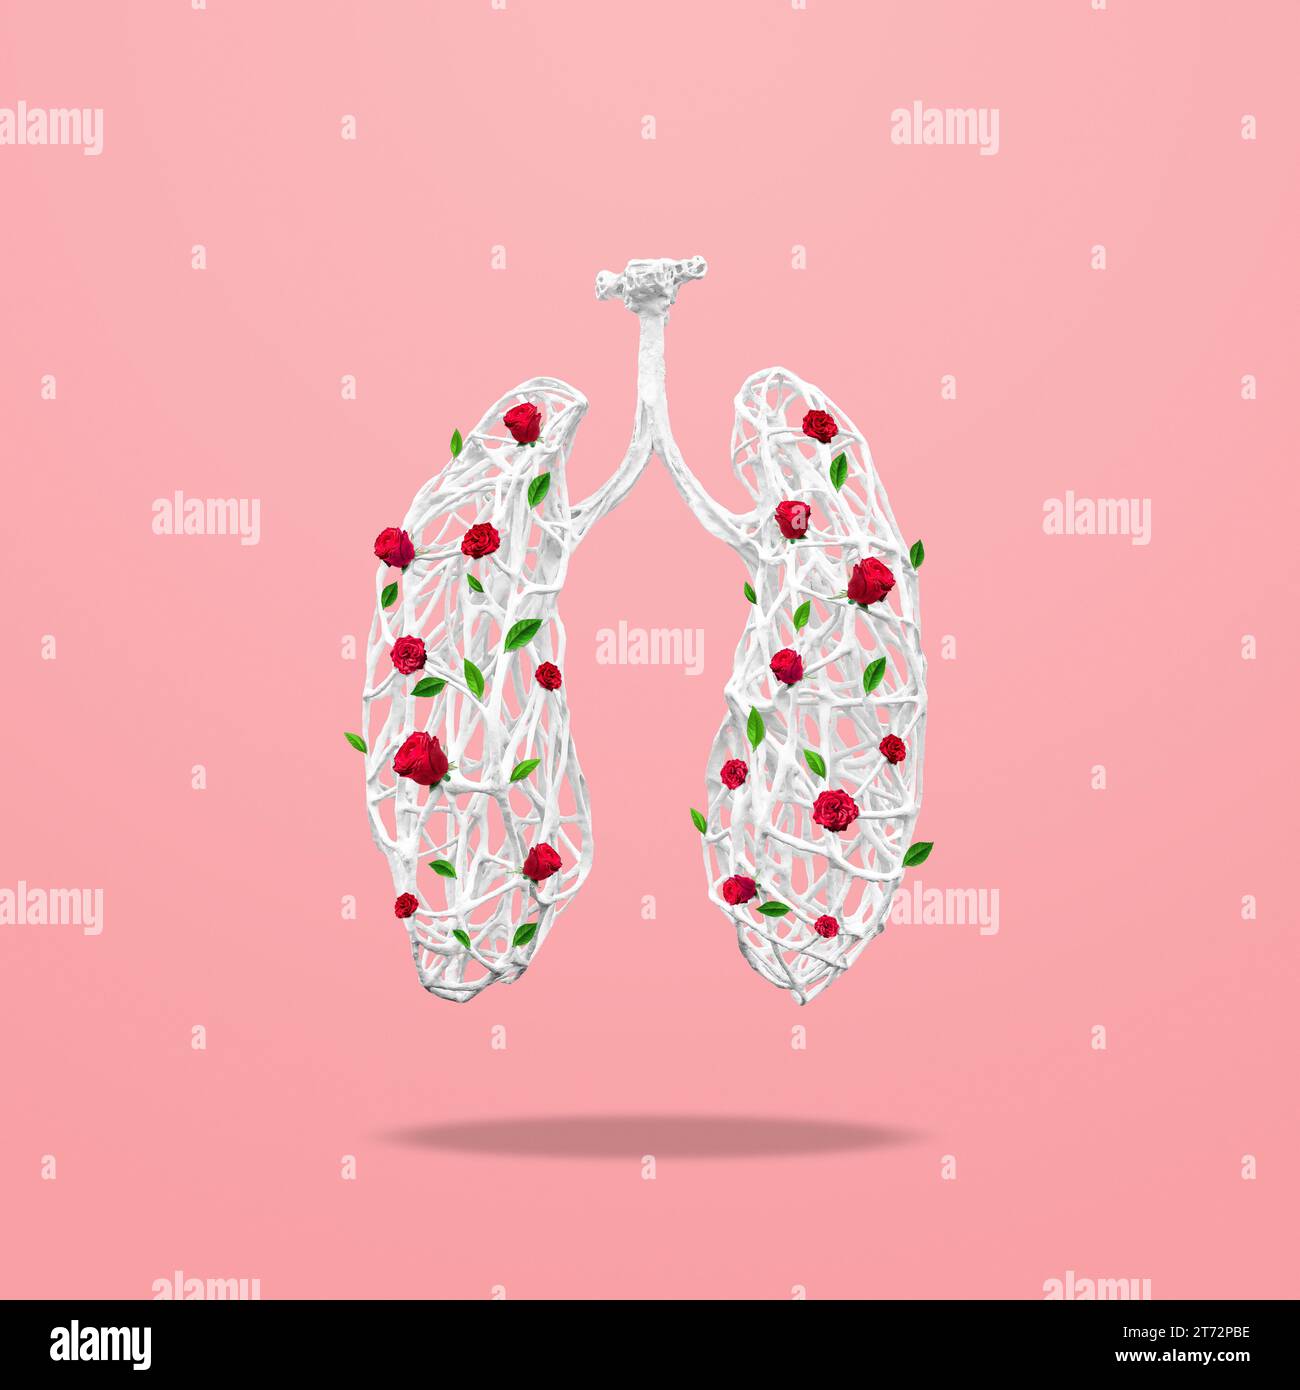 Medical concept made of white wooden branches in shape of human lungs with flowers on pink background. Inflammation of the lungs, viral epidemic. Stock Photo